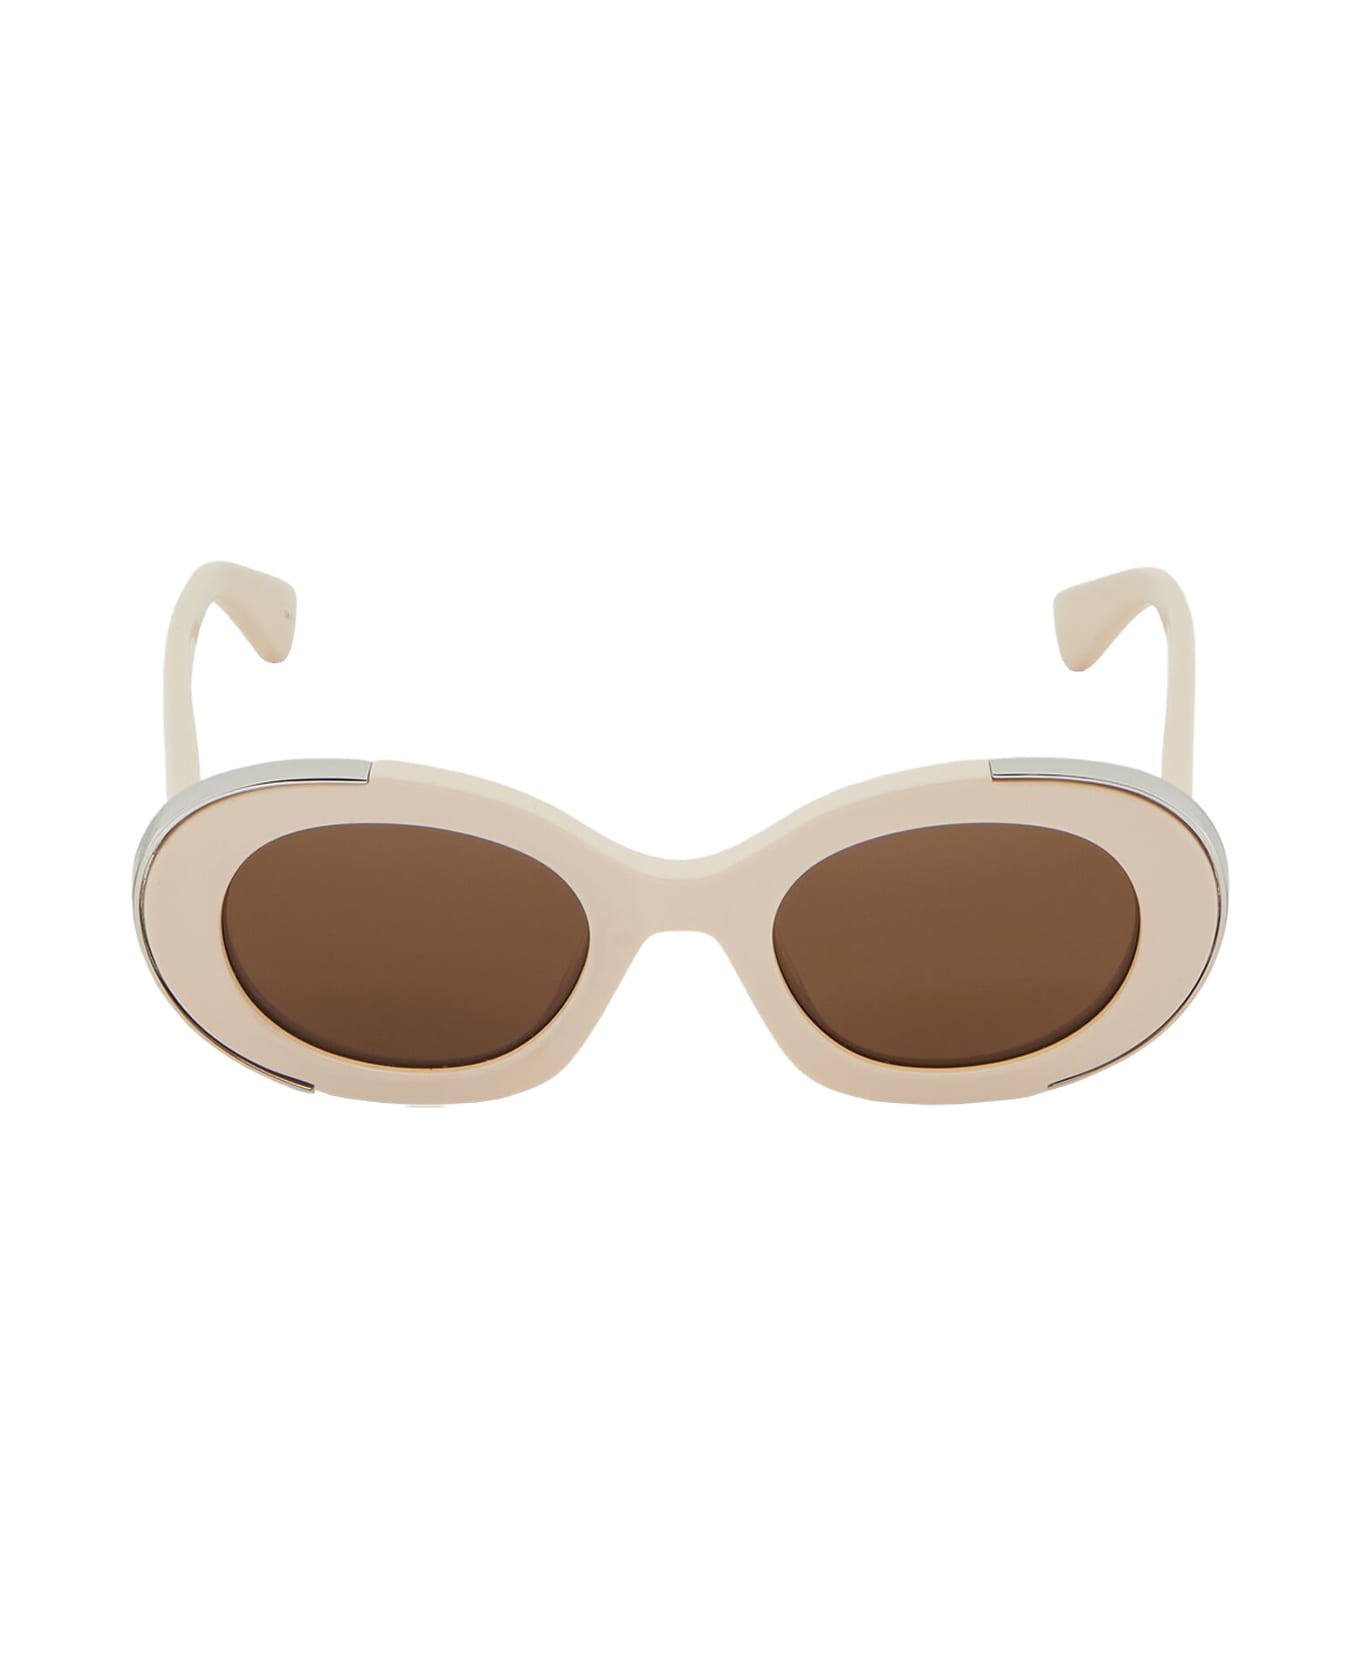 Alexander McQueen Oval The Grip Sunglasses In Ivory/brown - Brown